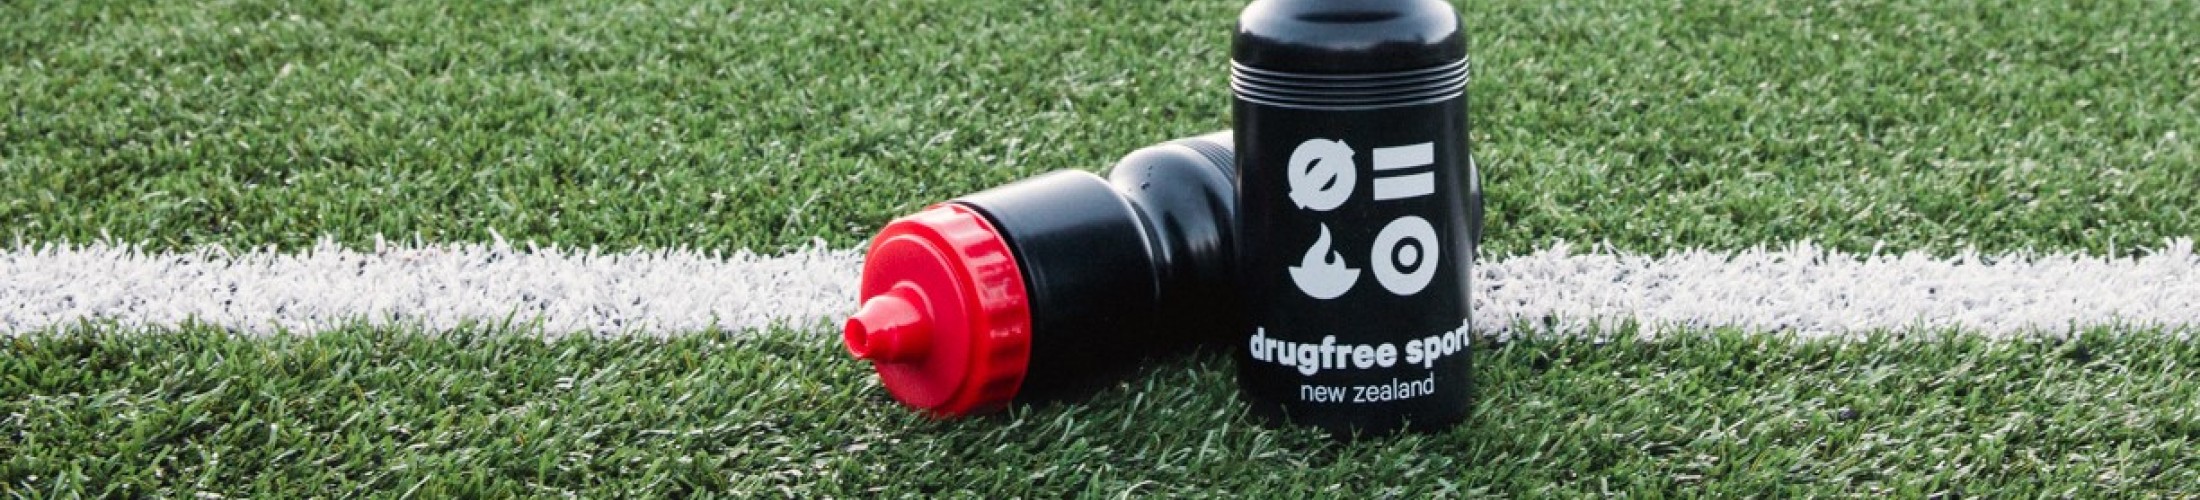 DFSNZ drink bottles on the side of a football pitch.